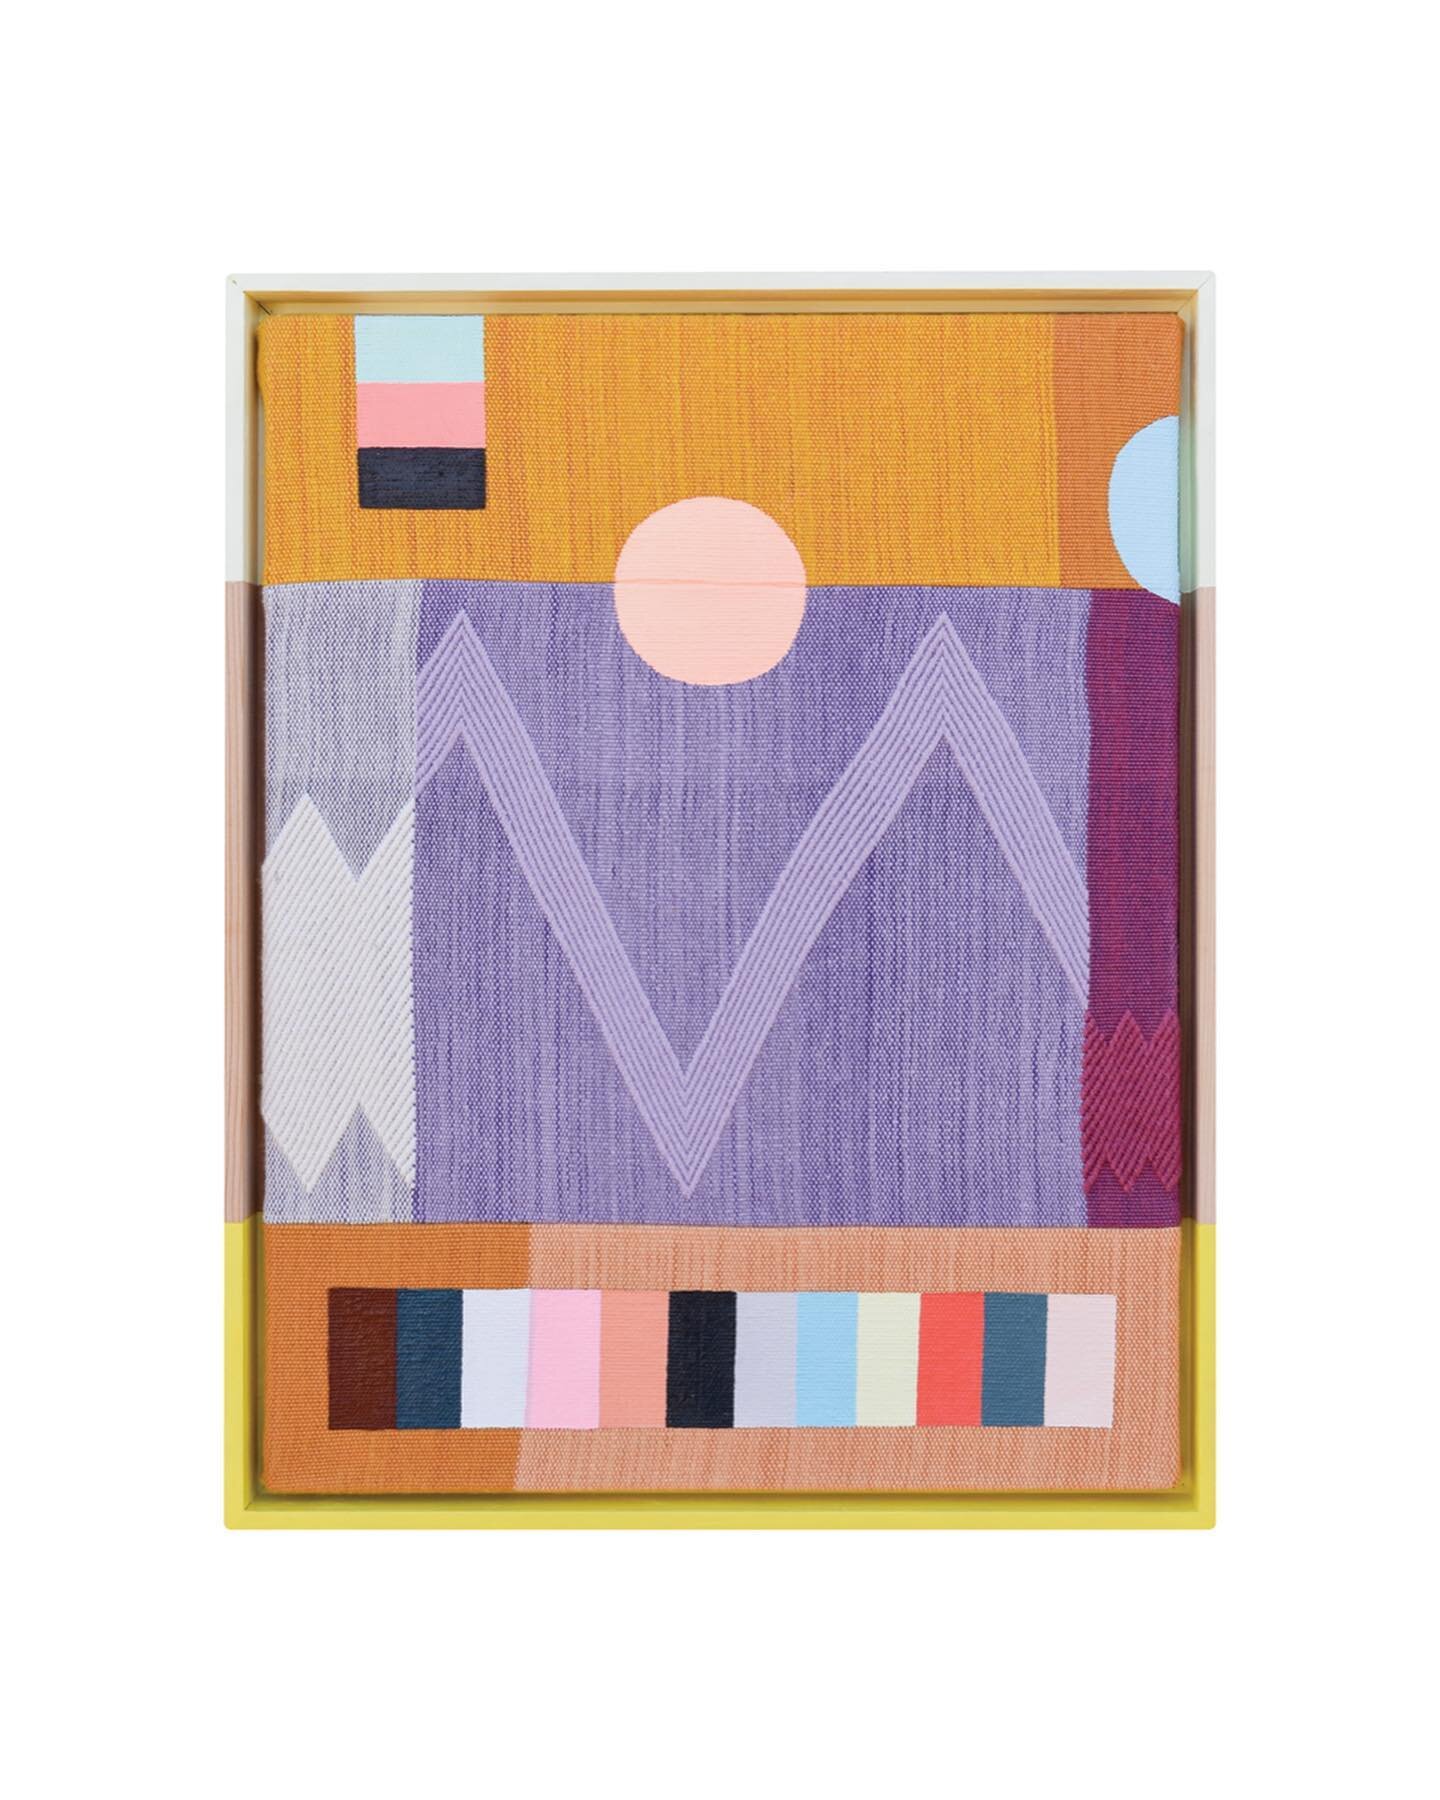 new work just in time for the holidays. now available at @madorangallery3509.

🍊

&ldquo;heater&rdquo;
acrylic on handwoven textile
14&rdquo;w x 18&rdquo;h (unframed)
15.5&rdquo;w x 19.5&rdquo;h x 2.5&rdquo;d (framed, approx)
price upon request 
inq